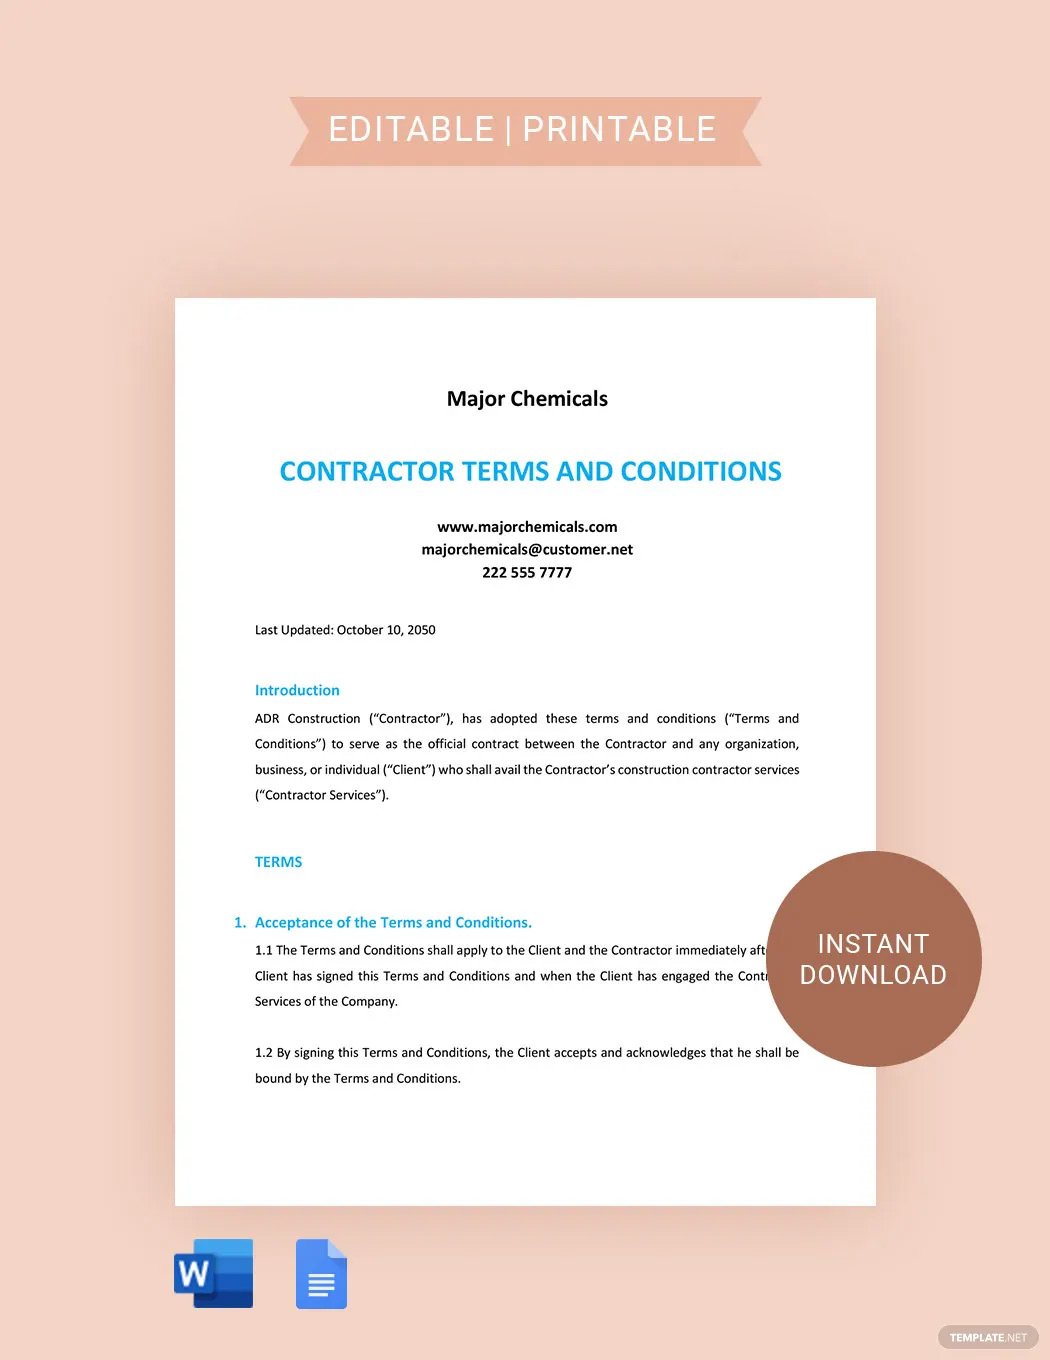 Vendor Terms And Conditions Template